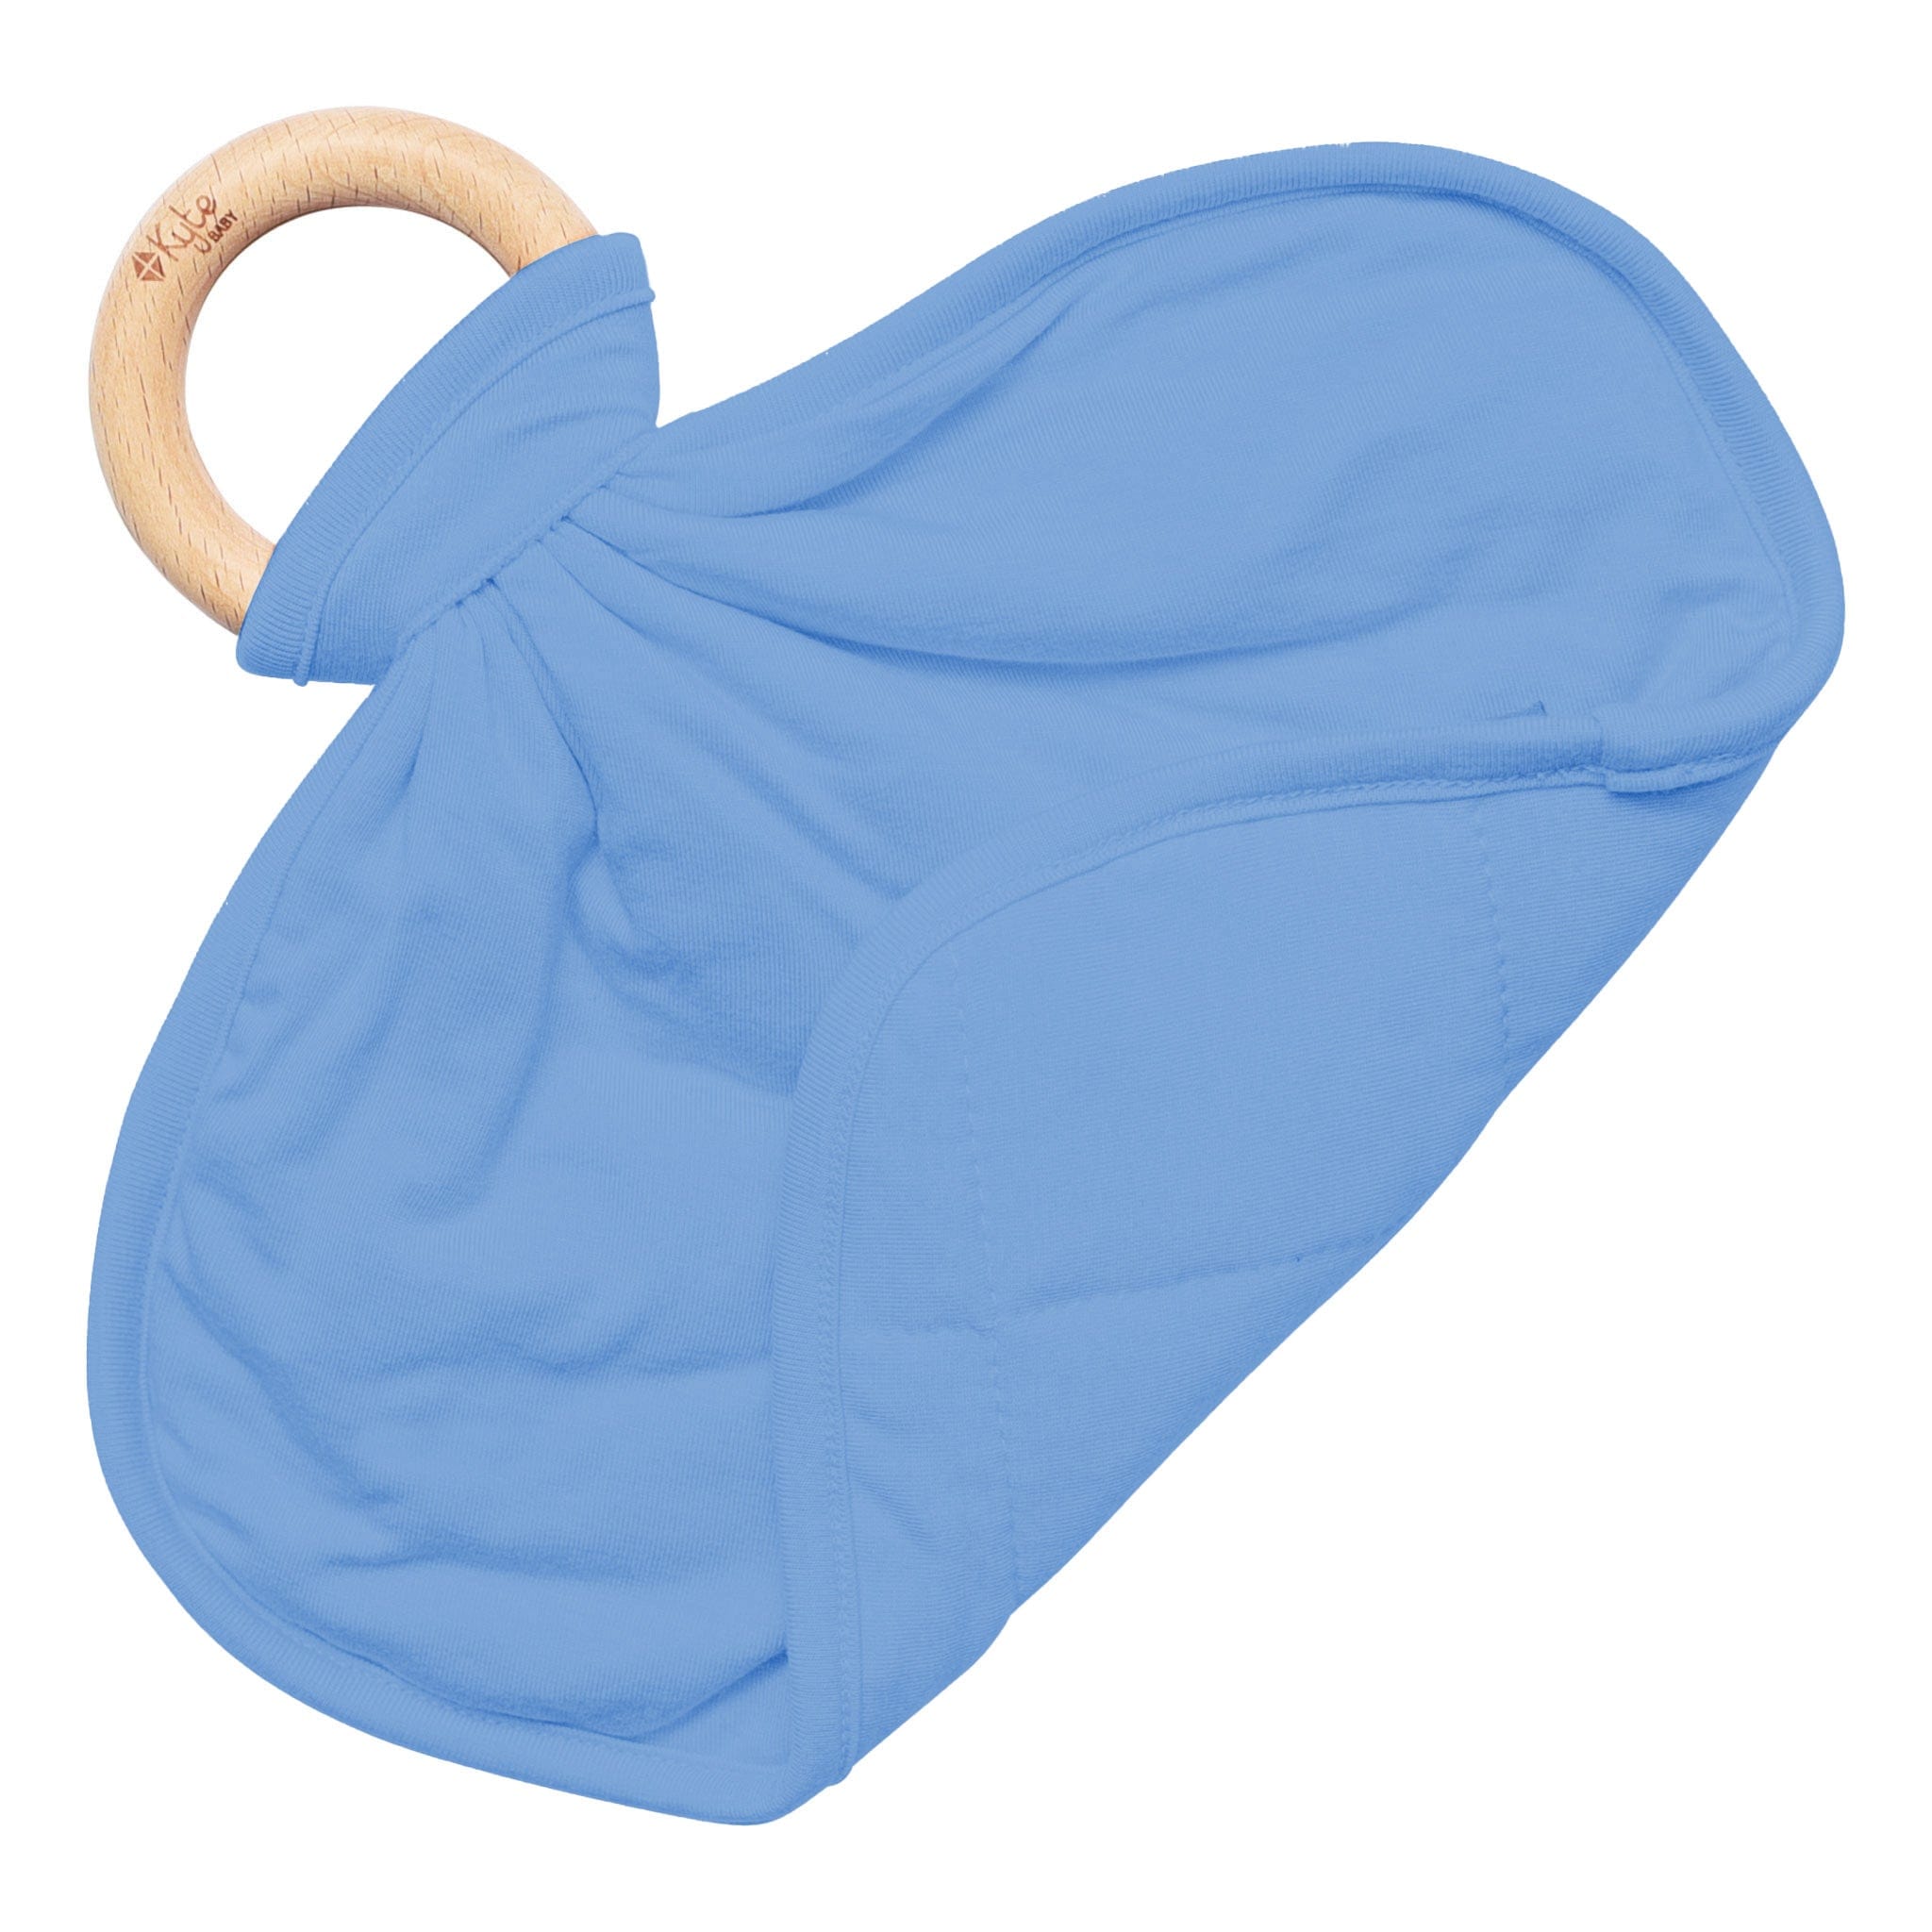 Kyte BABY Lovey Periwinkle / Infant Lovey in Periwinkle with Removable Teething Ring